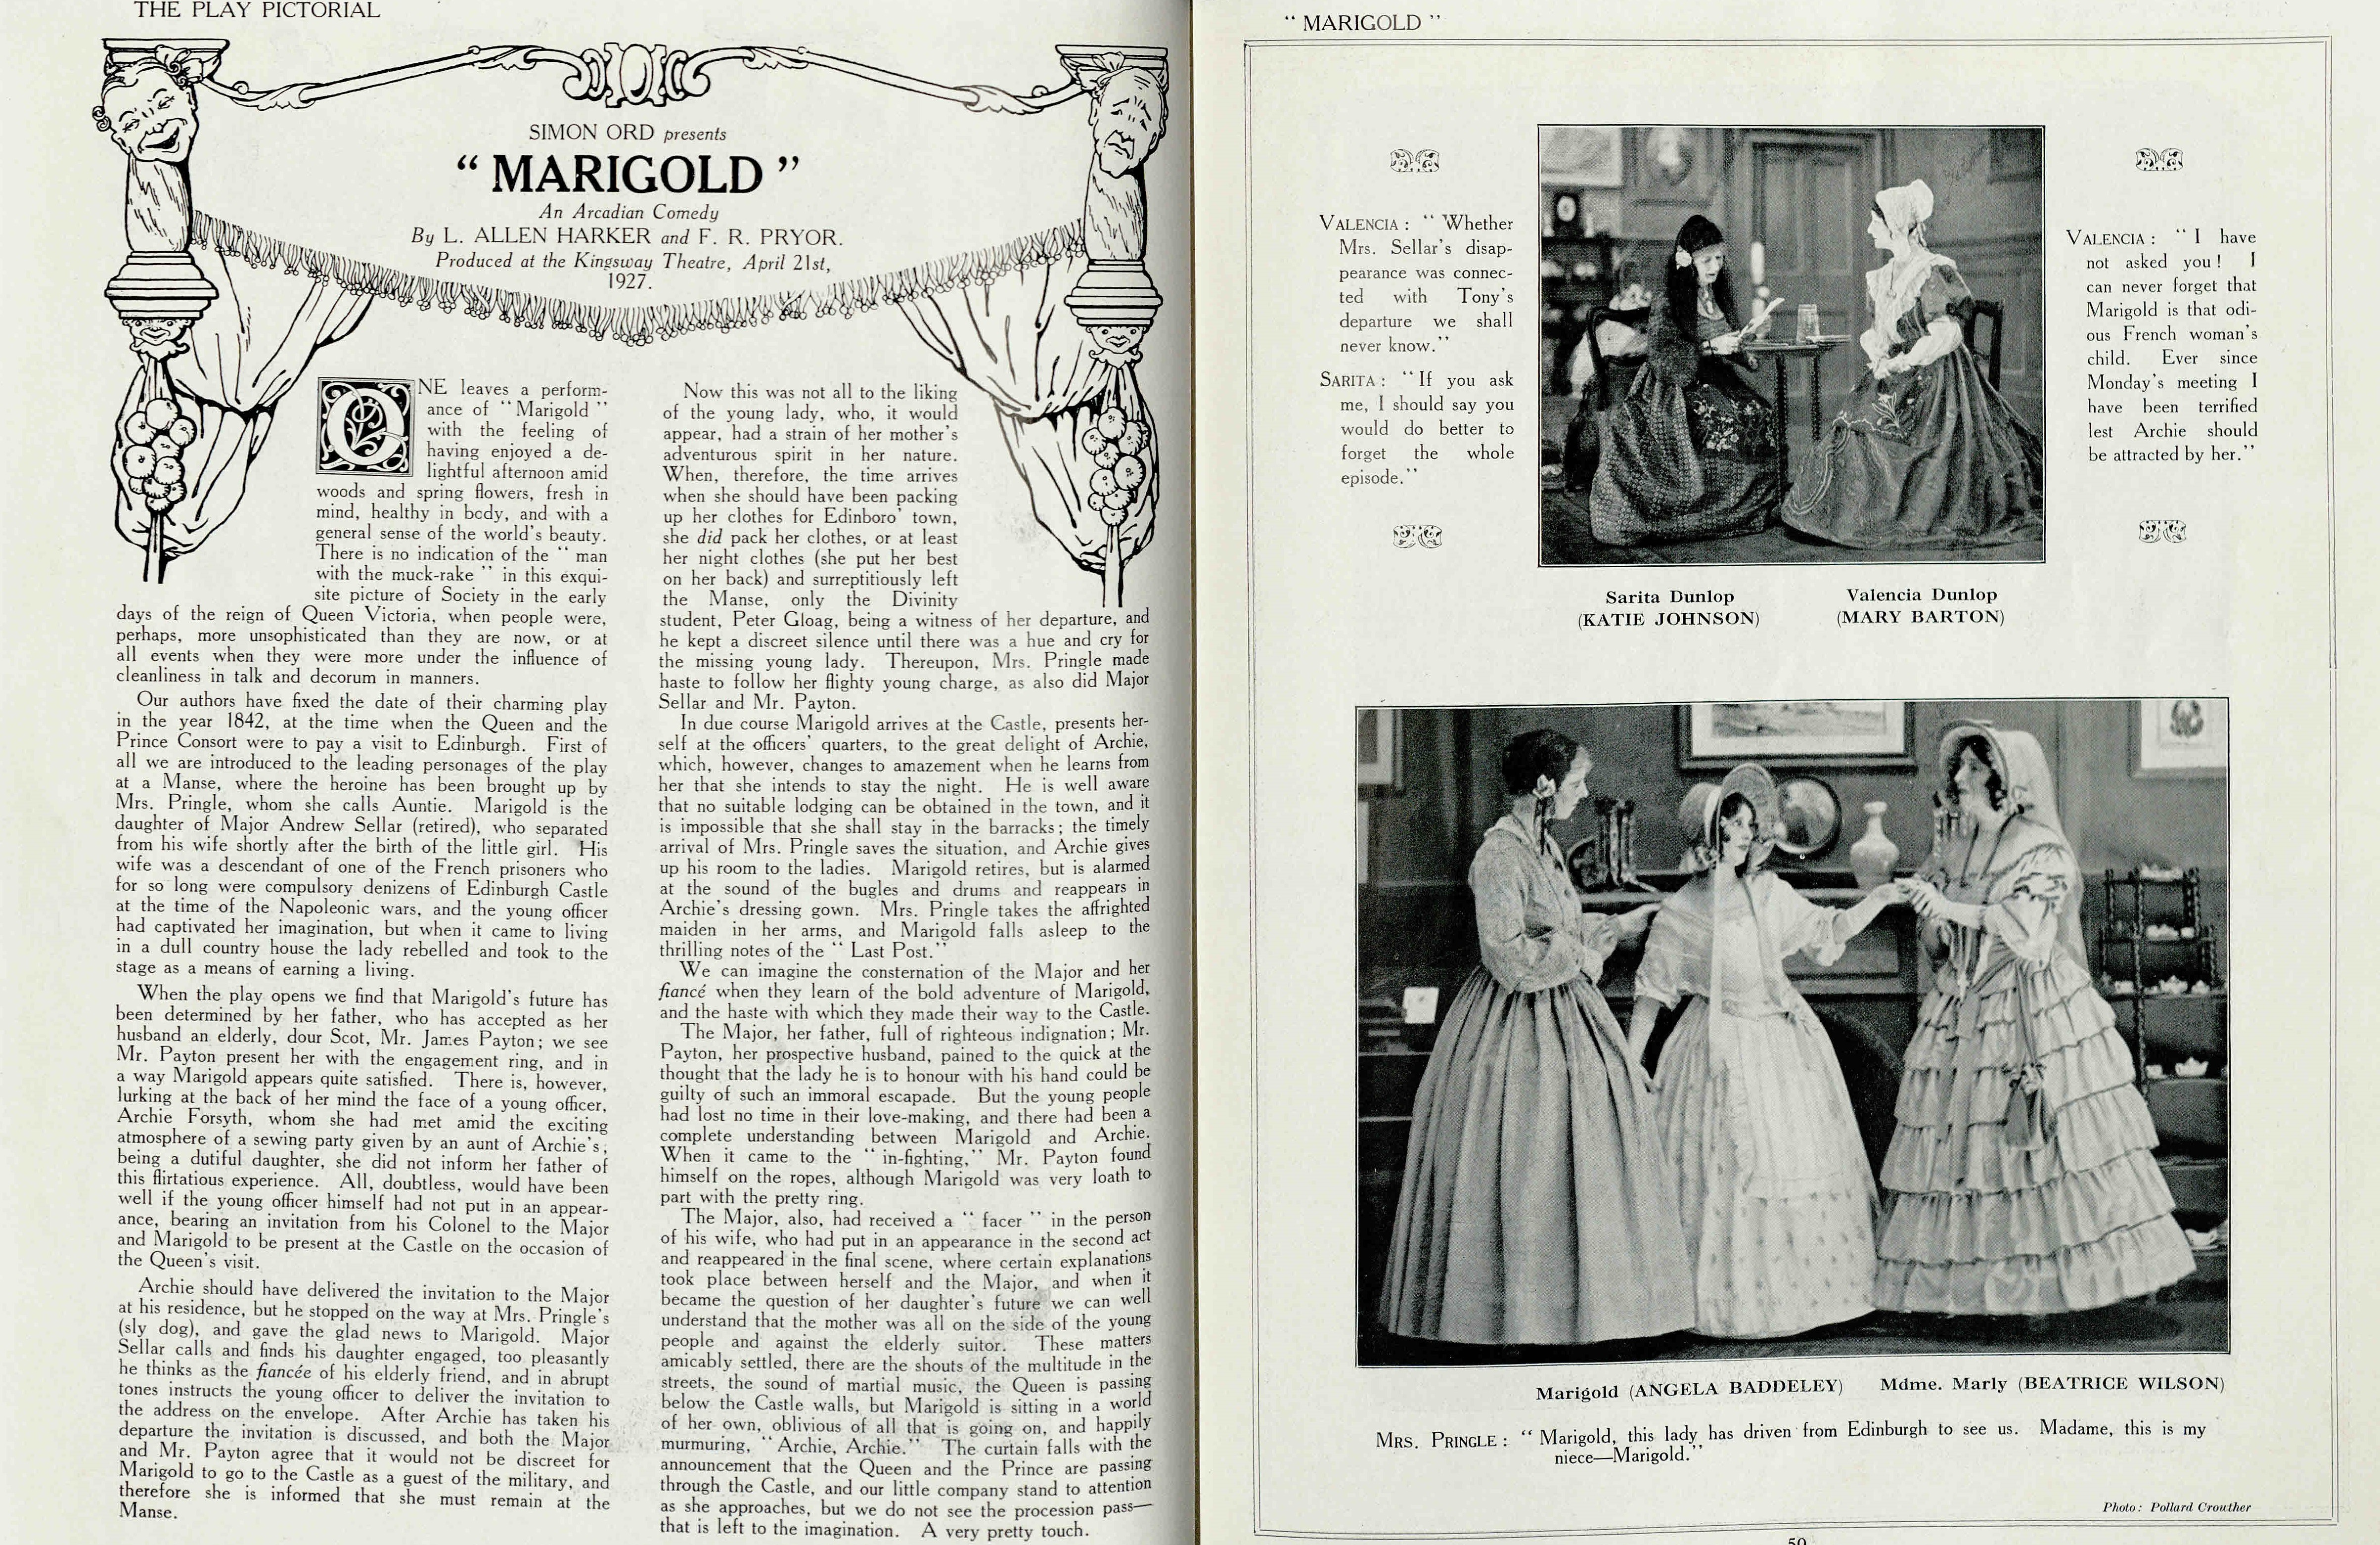 Information about Marigold, with photographs of some scenes